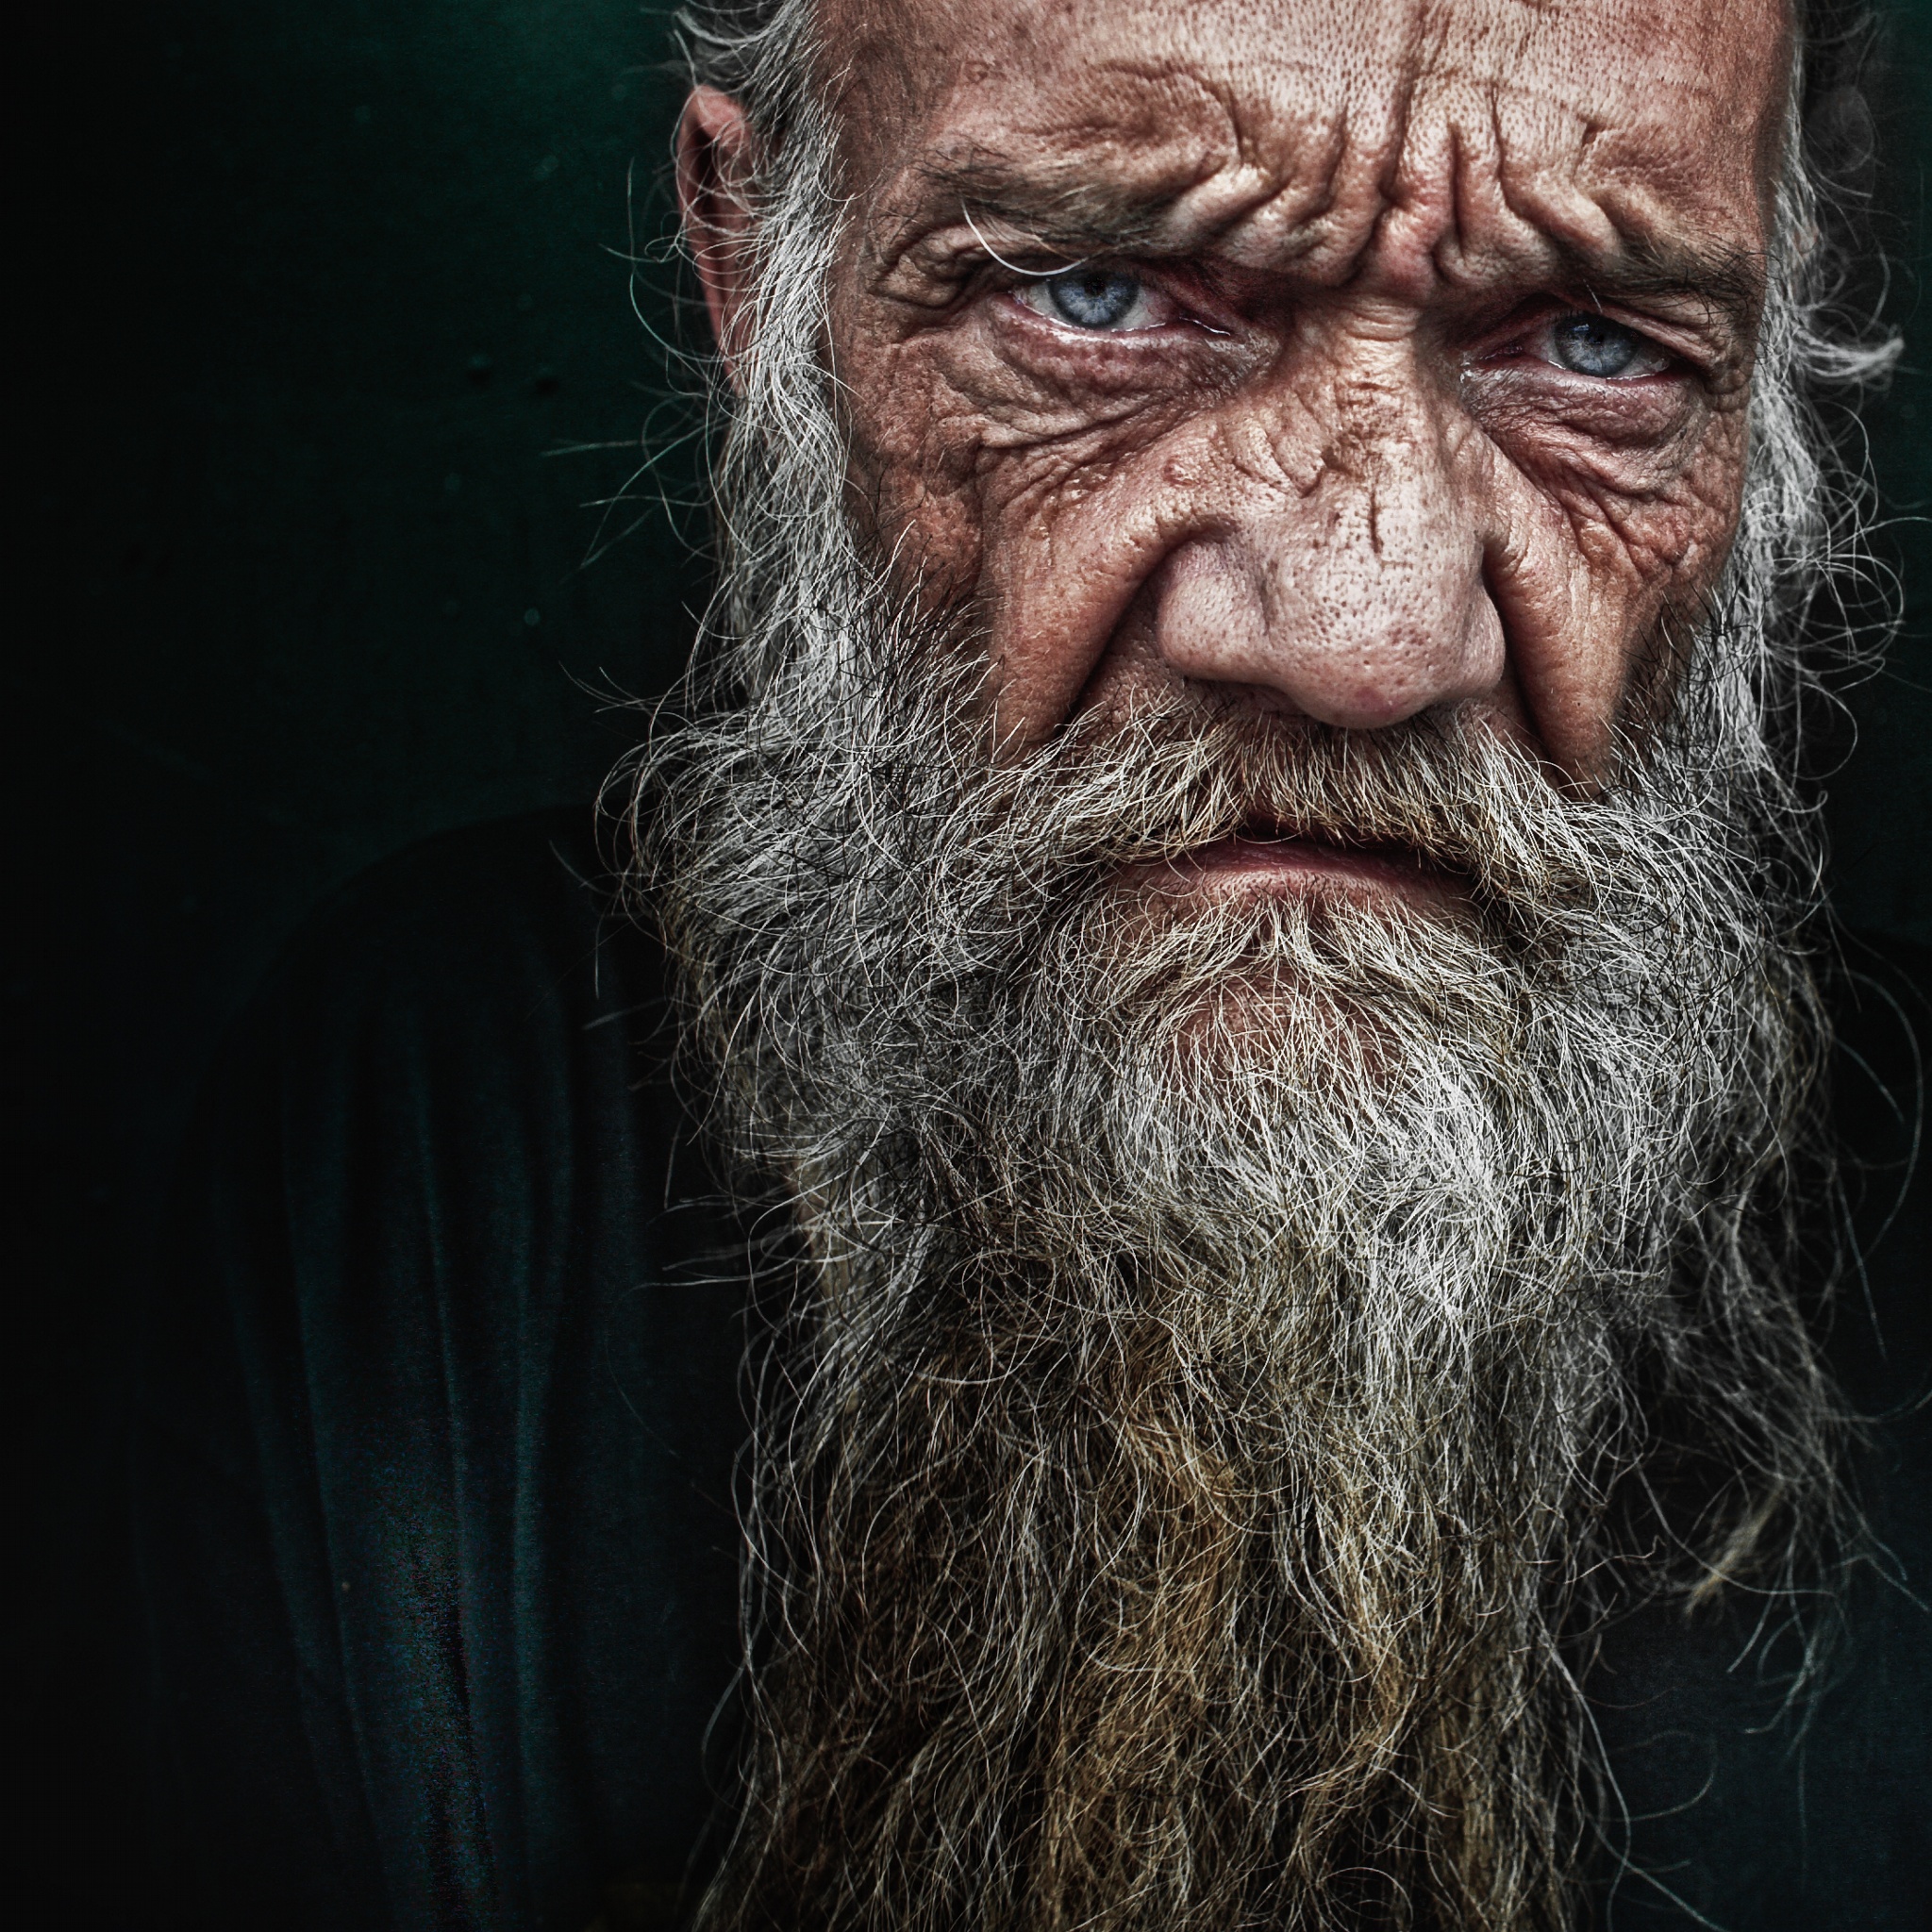 John. by Lee Jeffries on 500px | PEOPLE'S around the world ...